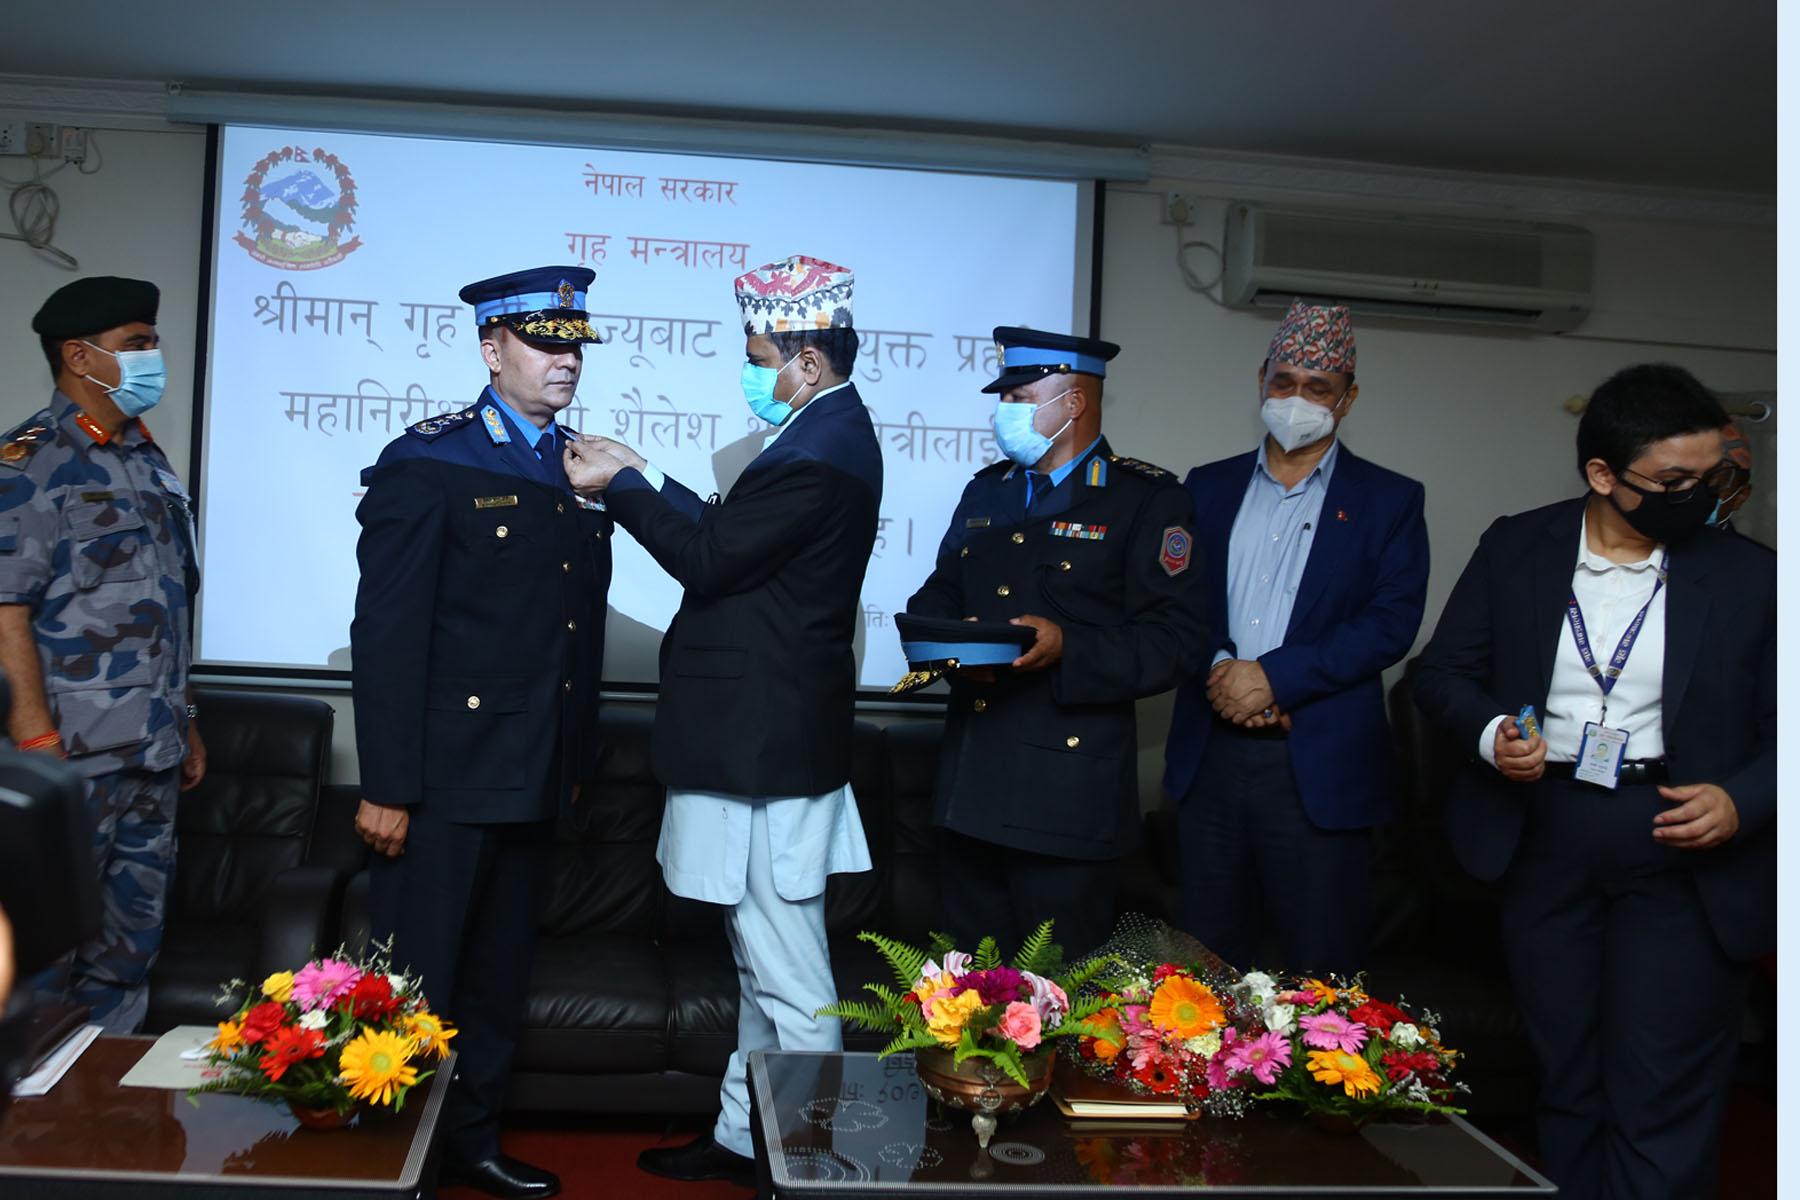 Home Secretary Maheshwor Neupane conferred insignia on newly appointed Inspector General of Police Shailesh Thapa Kshetri amid a function organised at the Ministry of Home Affairs on Thursday, July 09, 2020. Photo: RSS